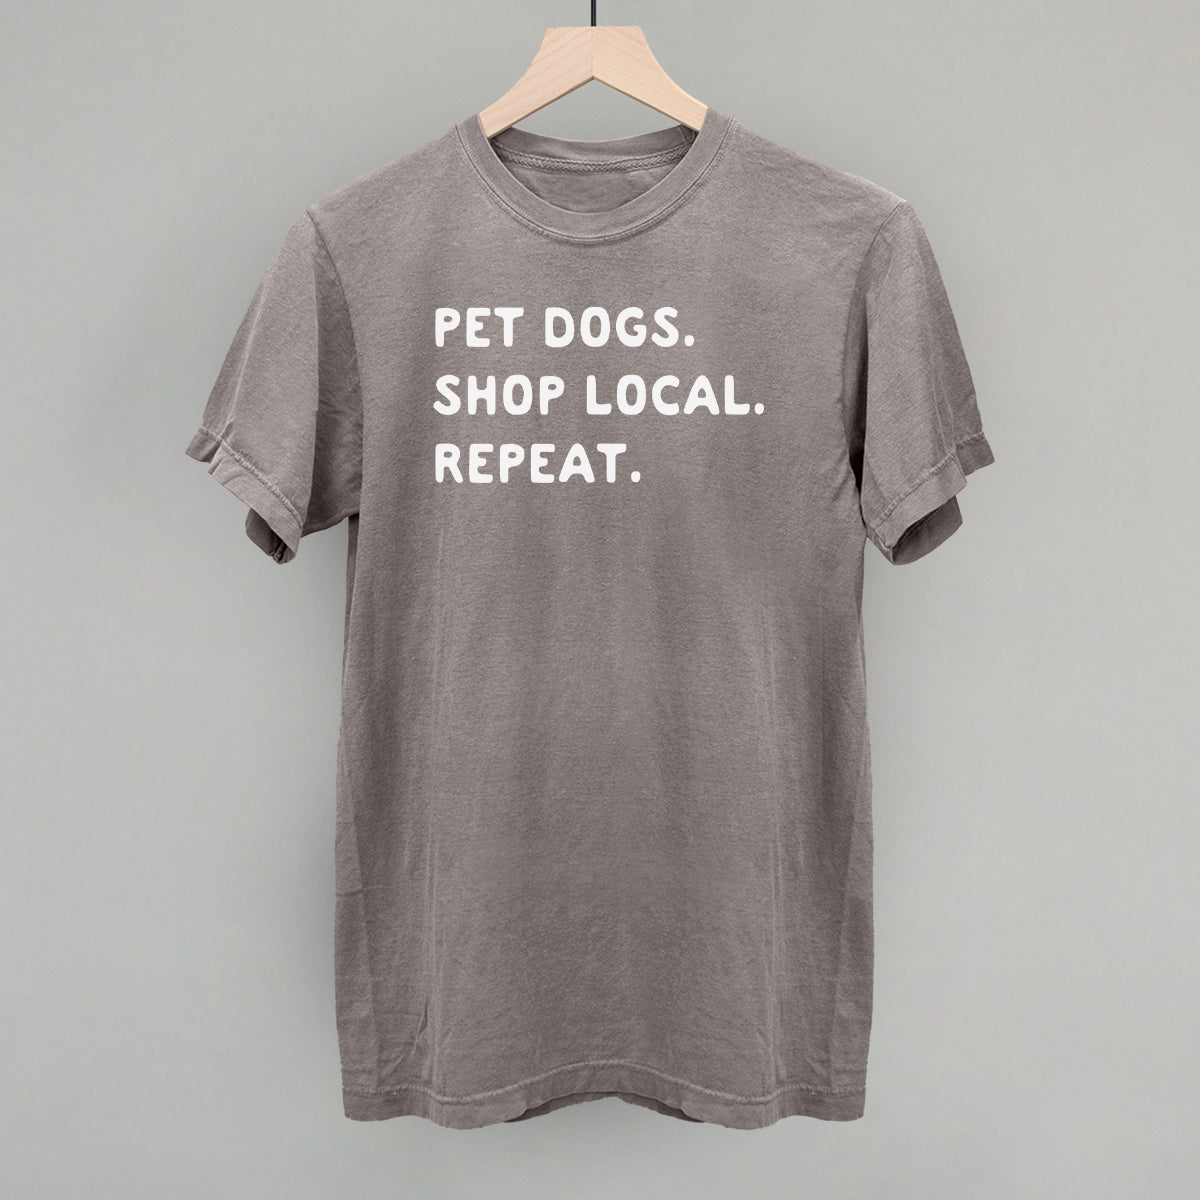 Pet Dogs. Shop Local. Repeat.